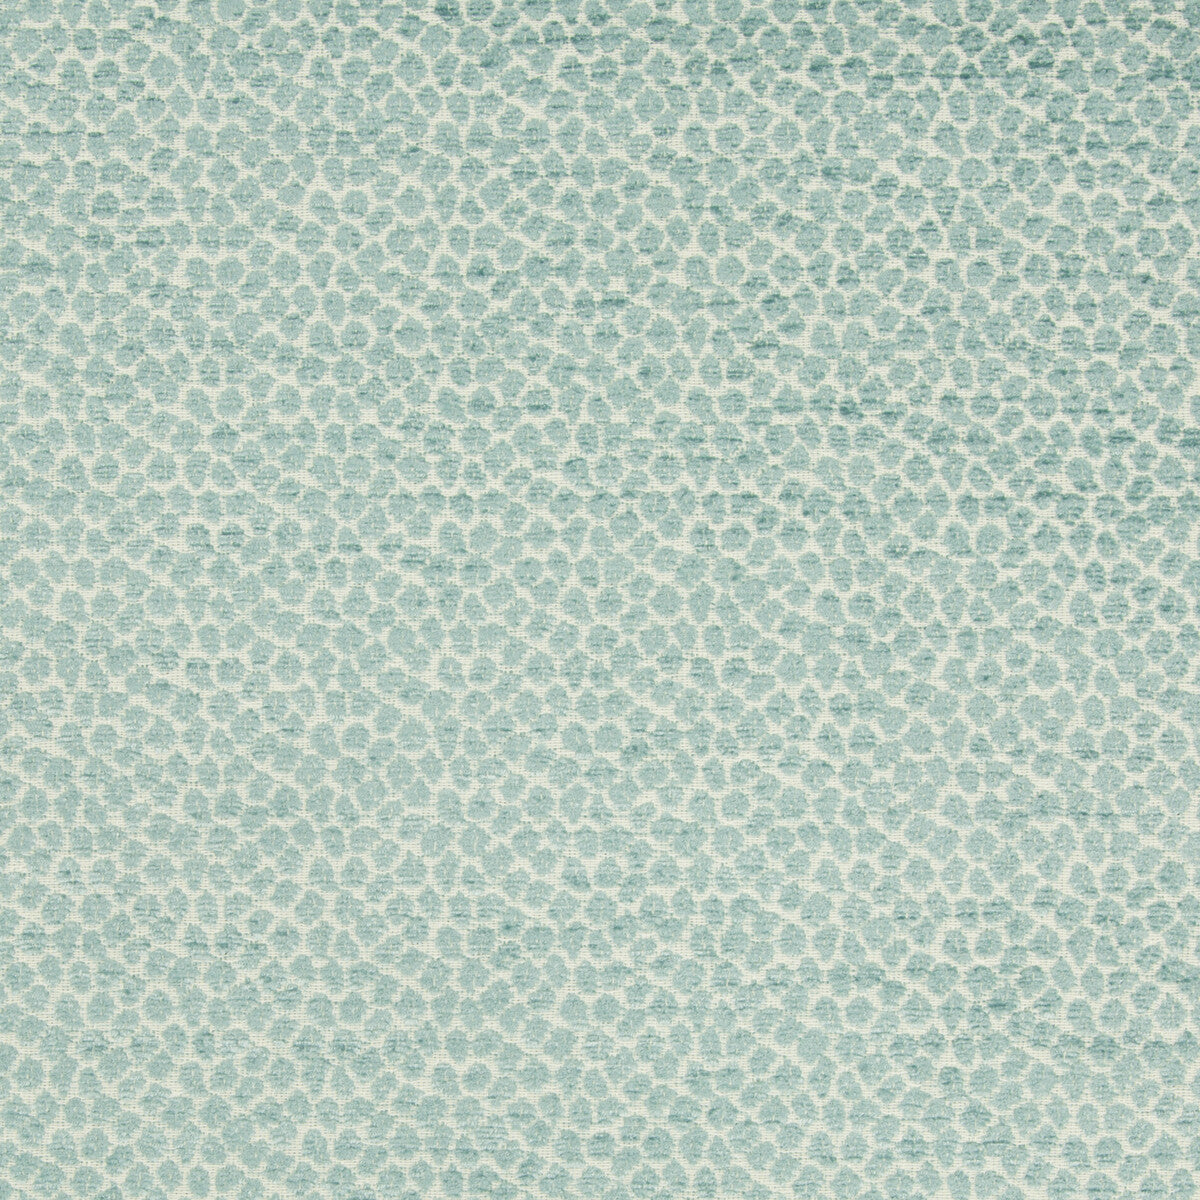 Kravet Design fabric in 34682-15 color - pattern 34682.15.0 - by Kravet Design in the Crypton Home collection